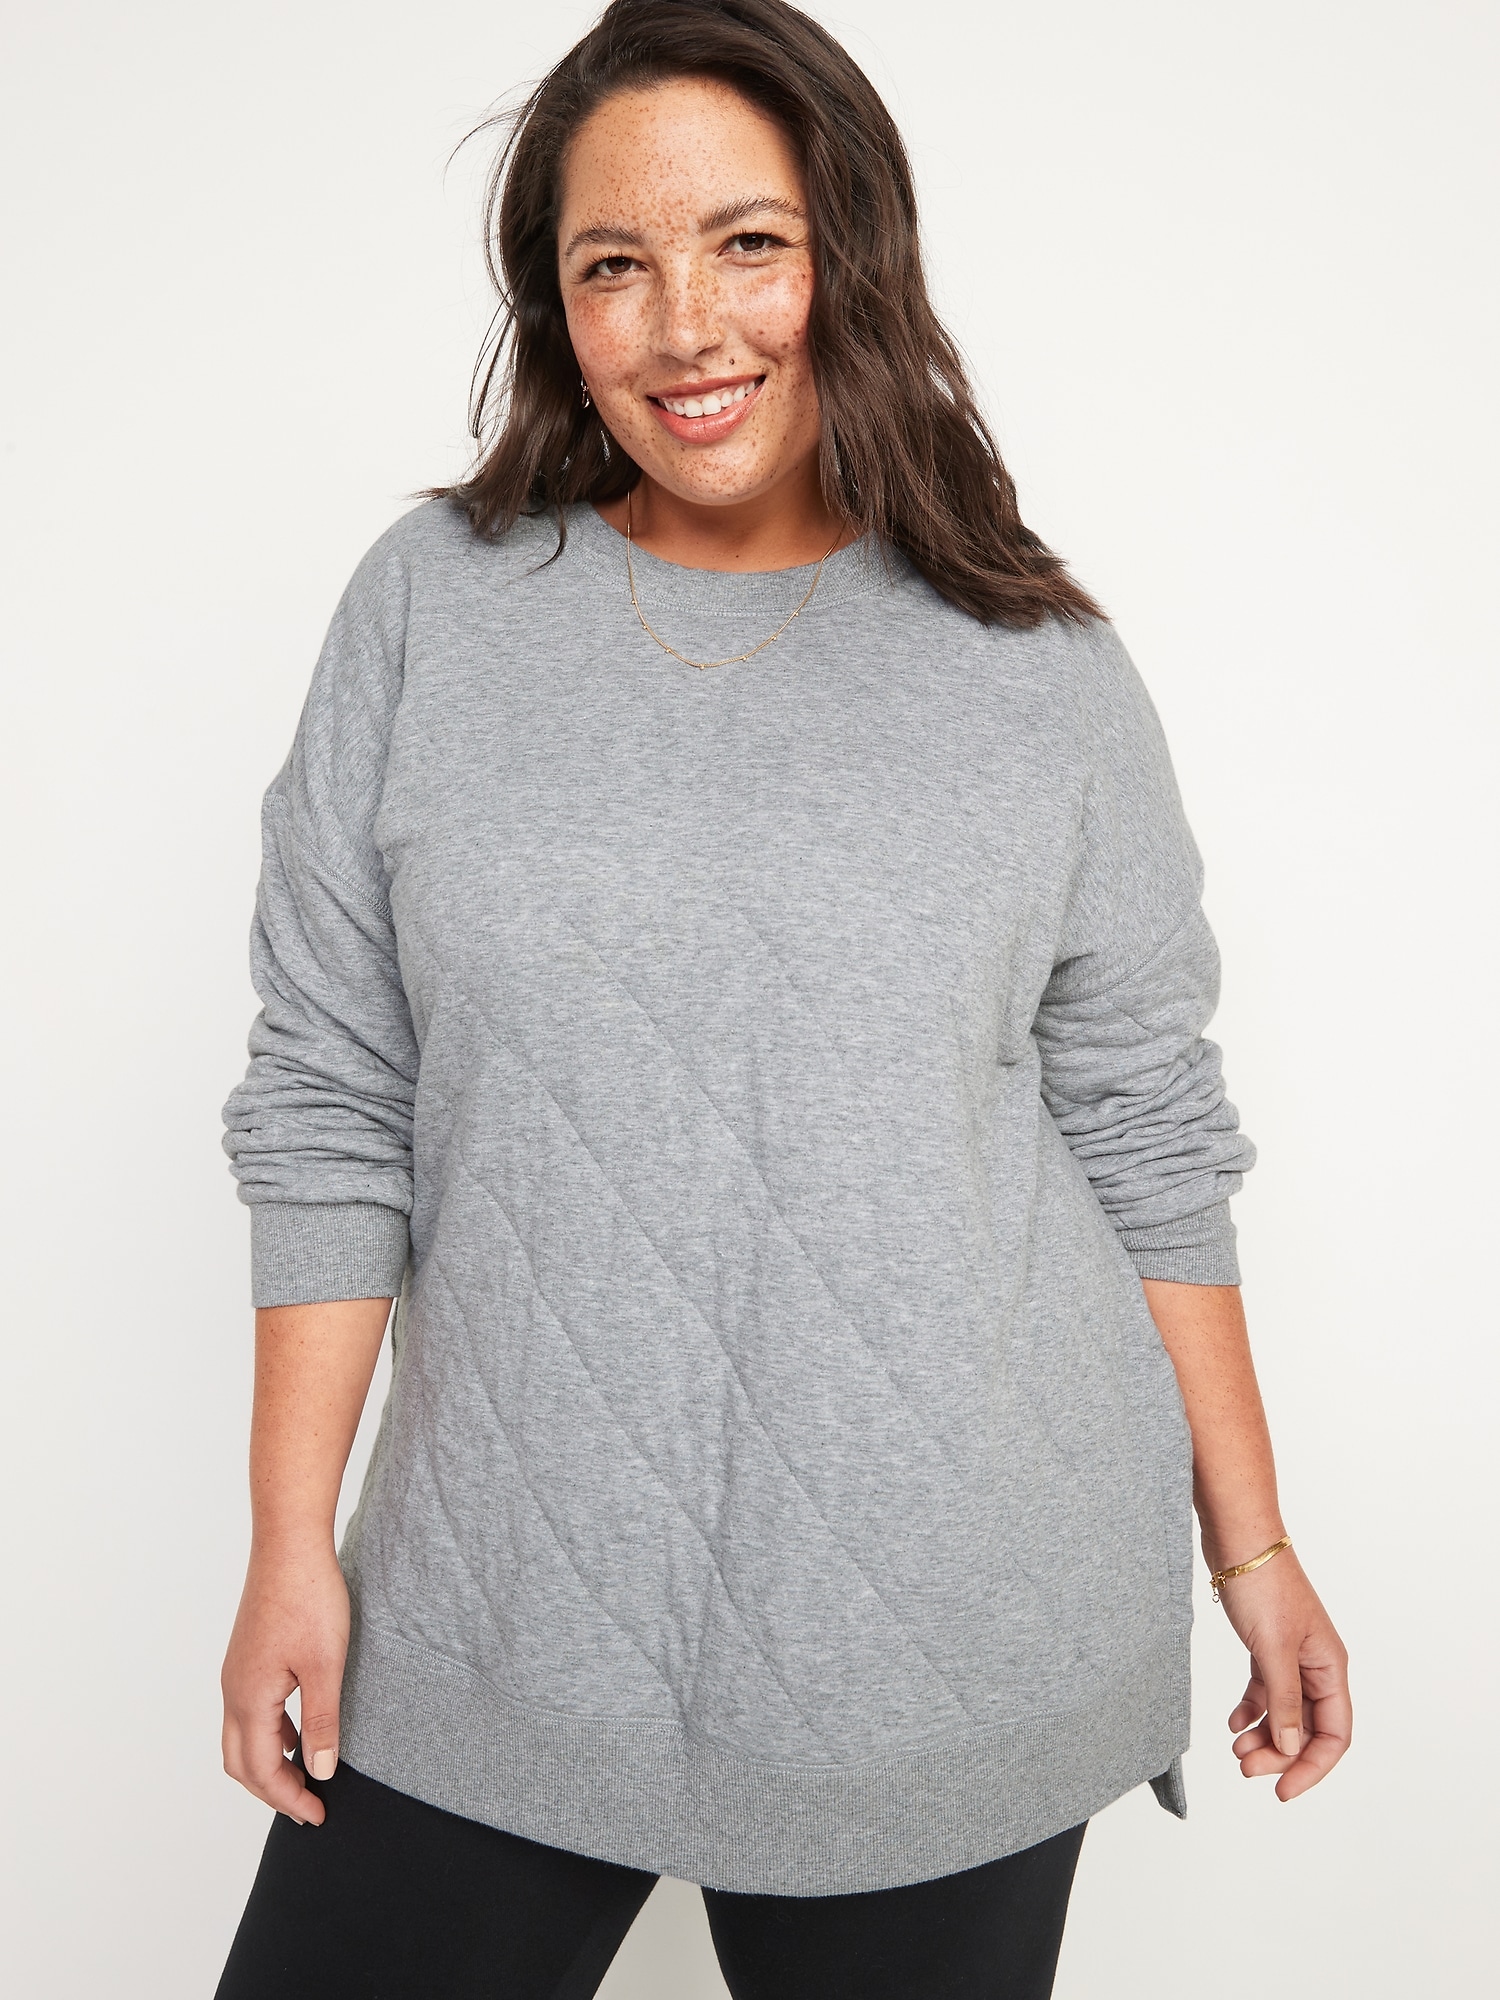 Long-Sleeve Vintage Quilted Tunic Sweatshirt | Old Navy